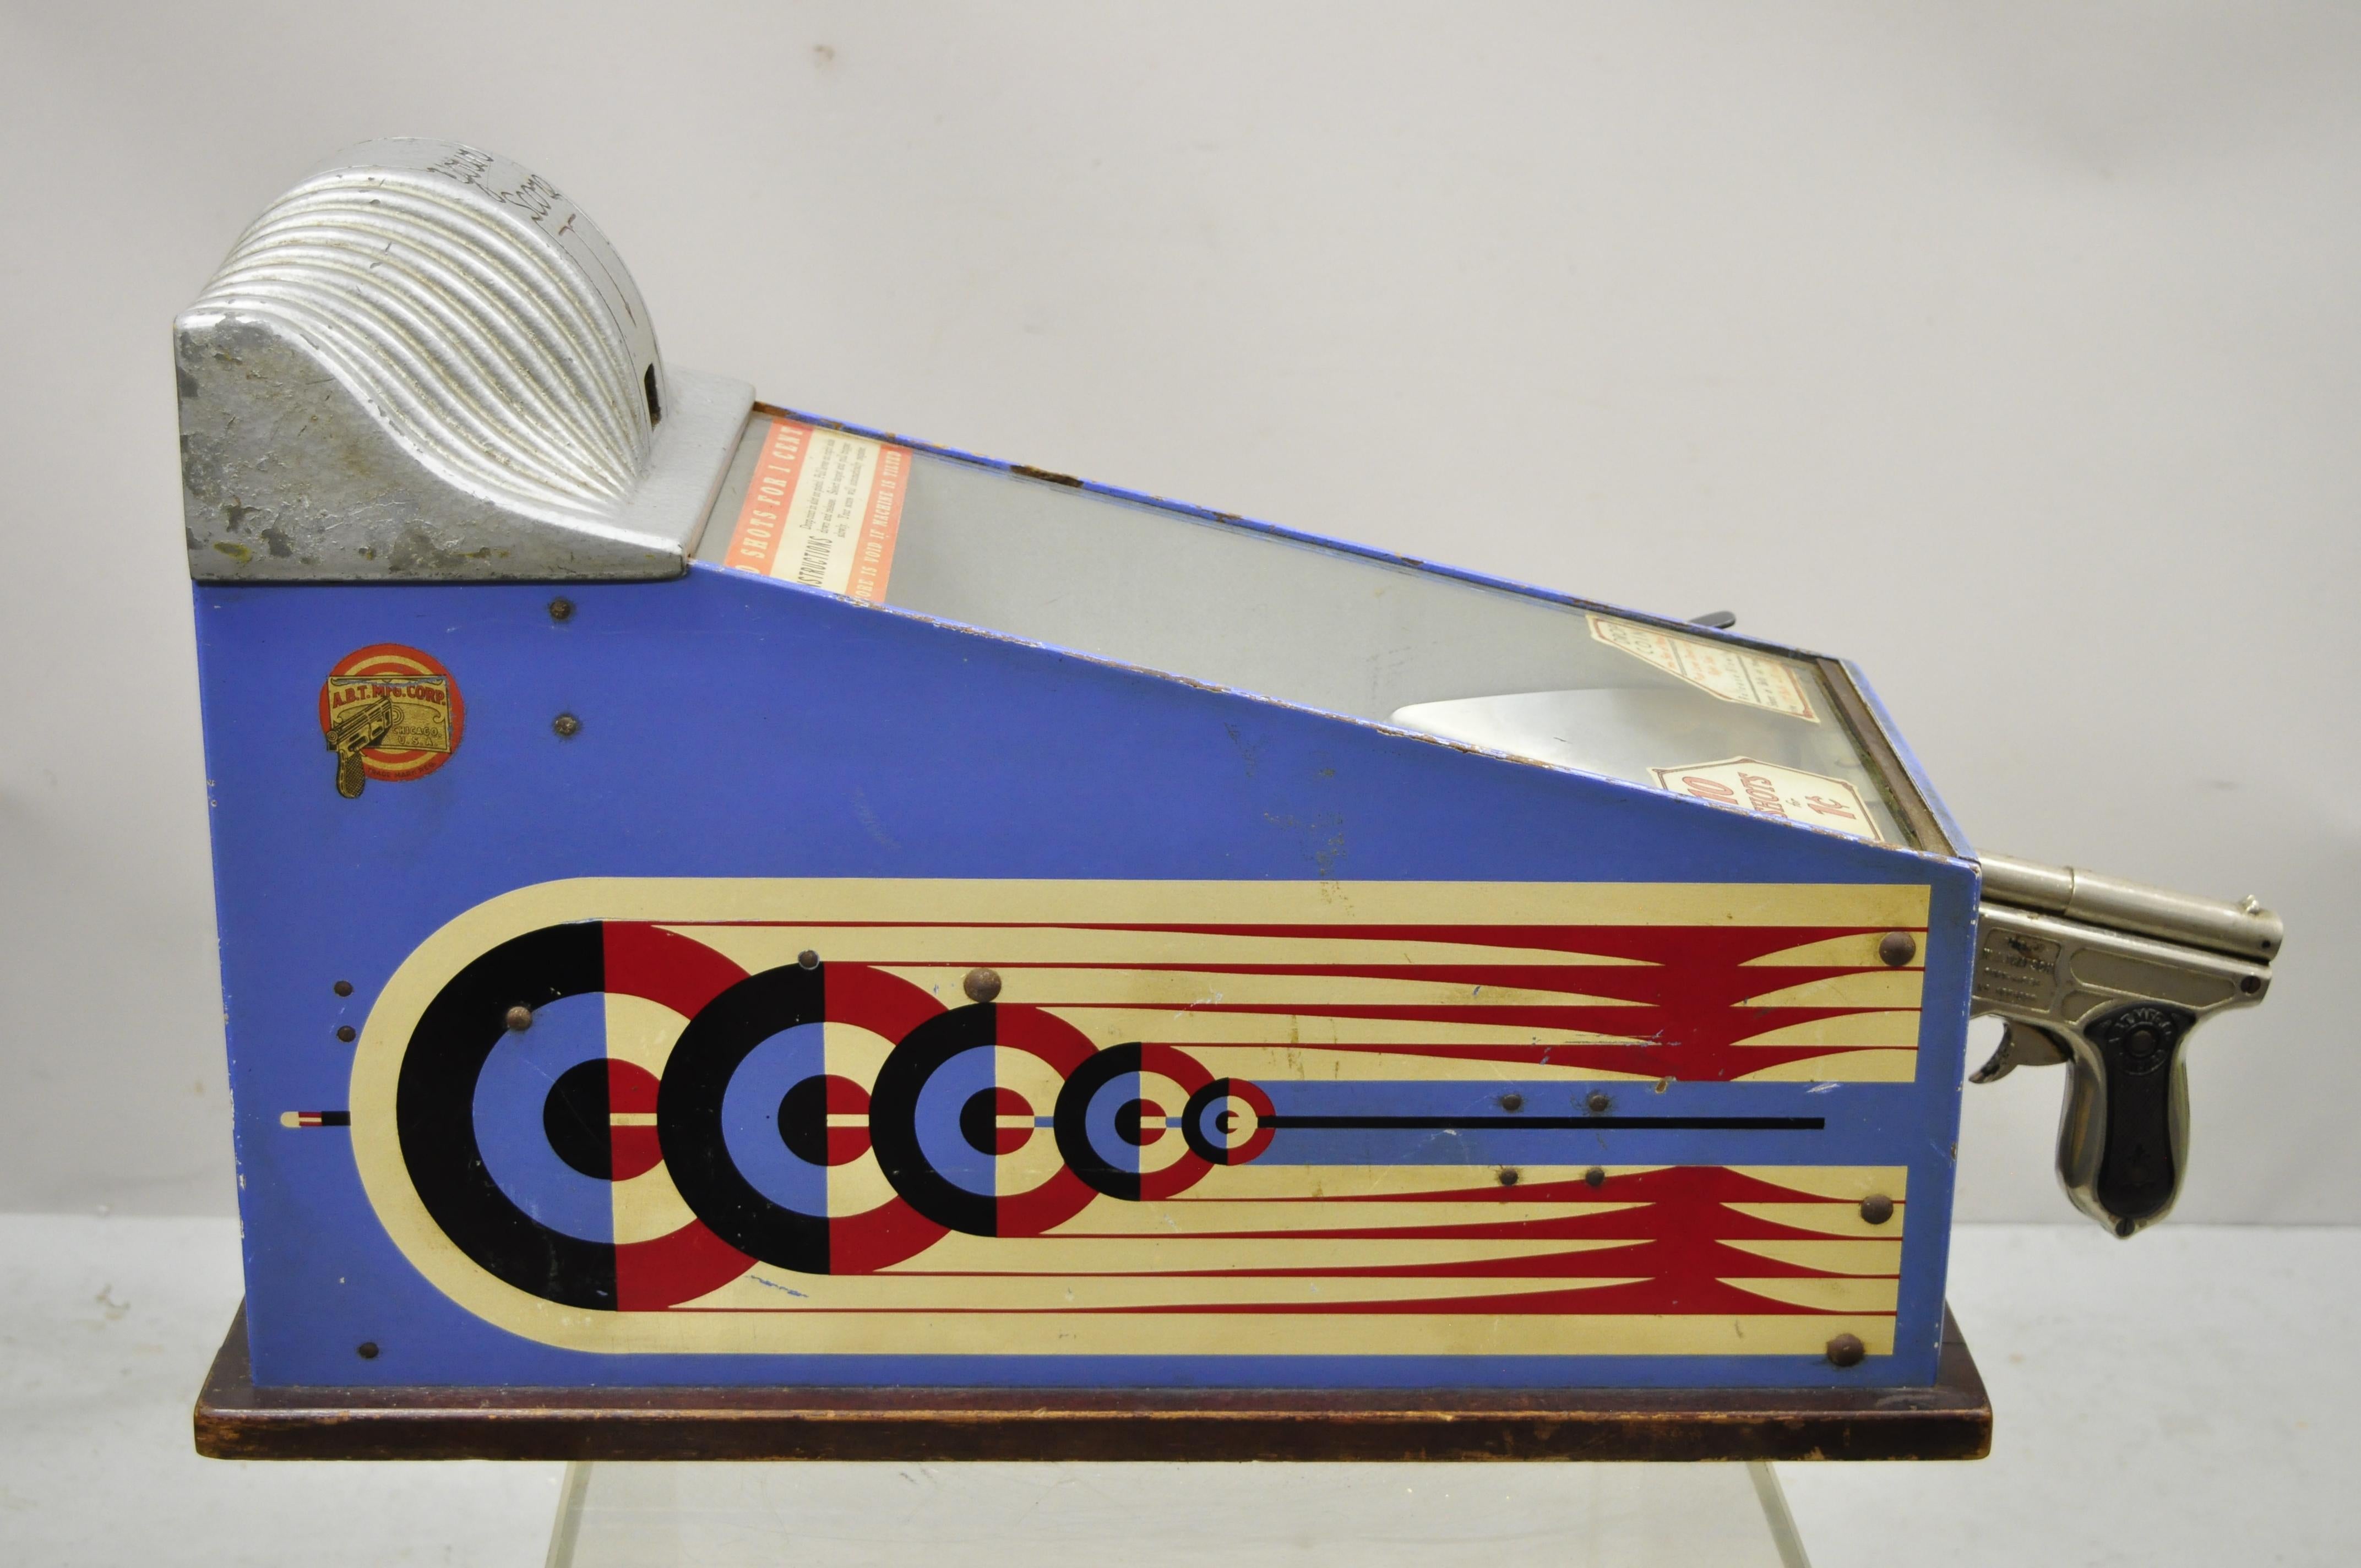 Vintage 1¢ ABT Mfg Corp Countertop Coin-Op Target Skill Arcade Game - Working. Item is a counter game manufactured by A.B.T. Mfg. Co. from 1925 to 1939, offering 10 shots for every 1¢, original labels, very nice antique item, quality American